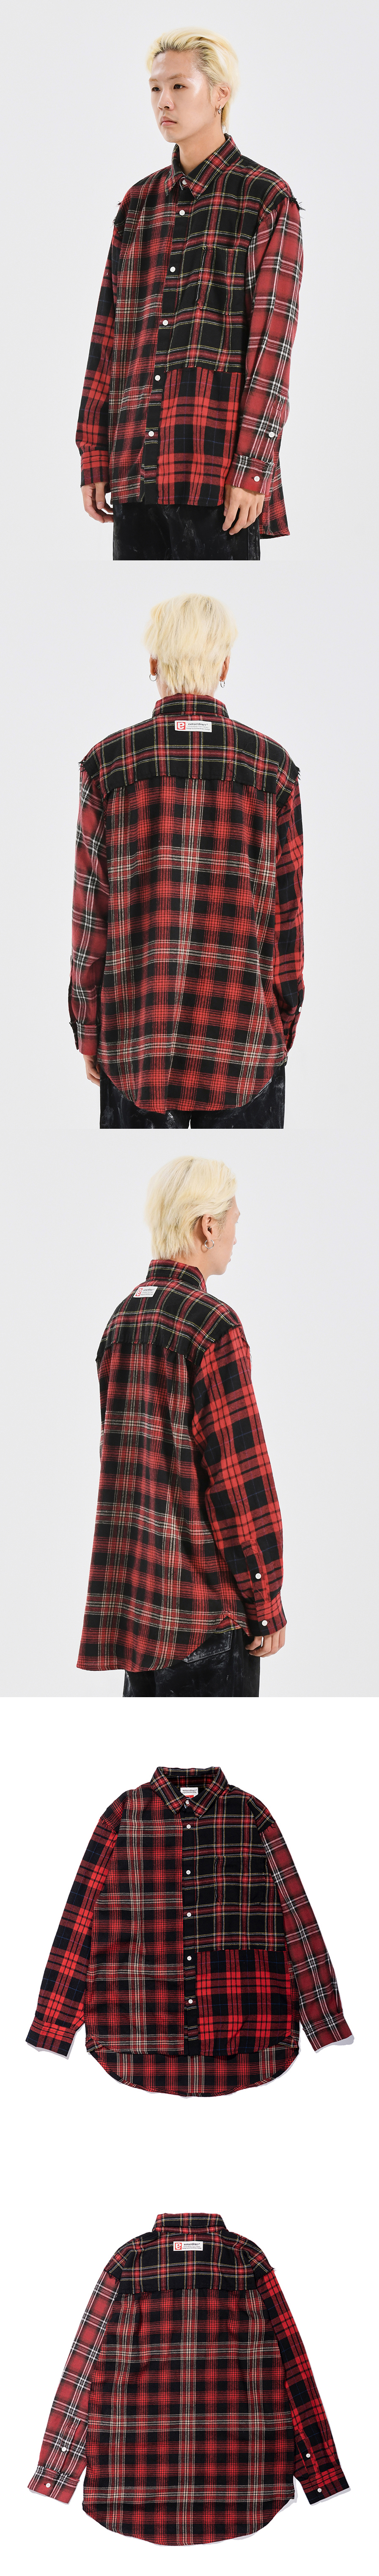 PATCH WORK CHECK SHIRT RED